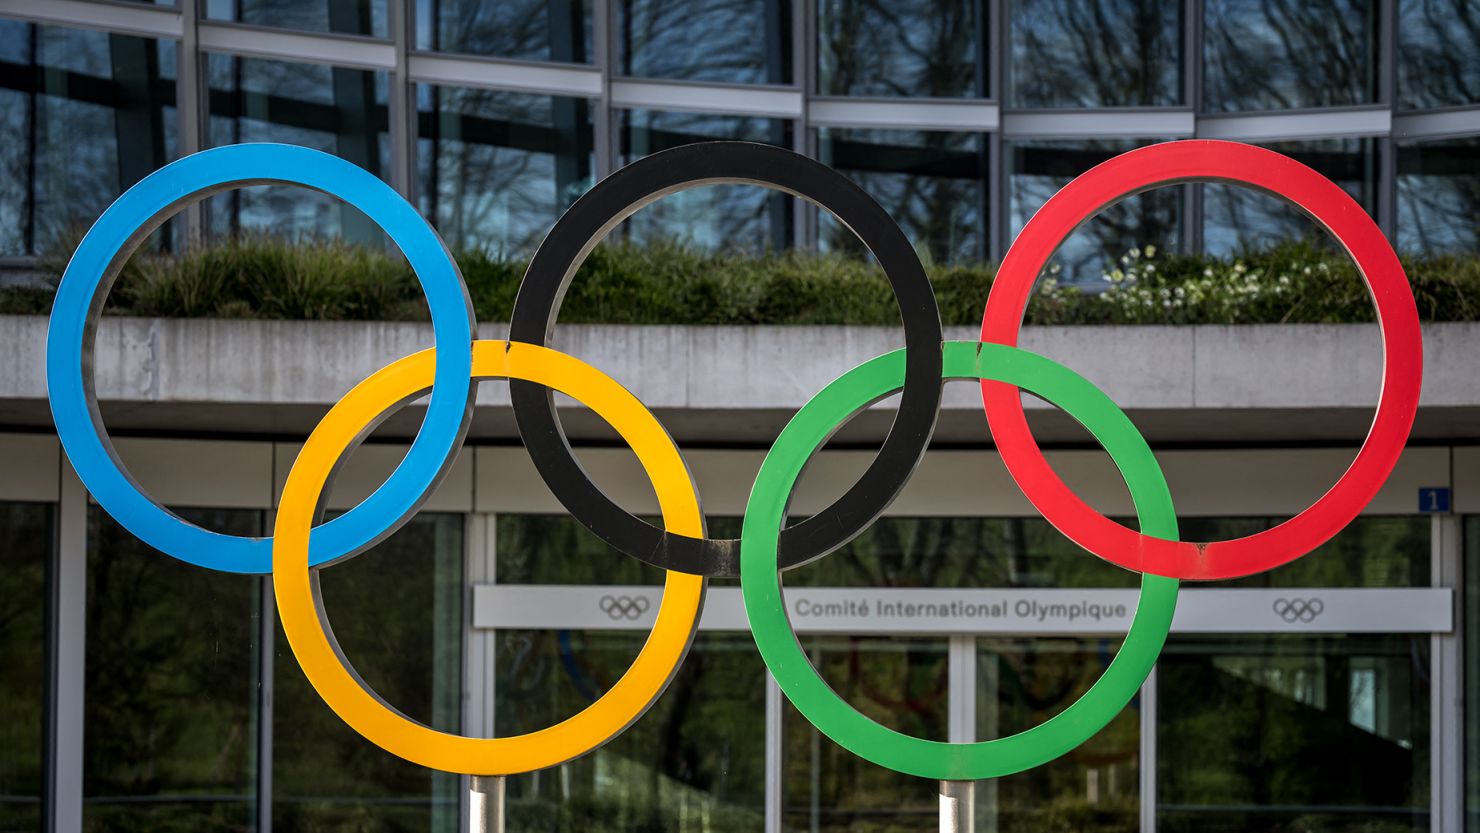 This year's Paris Olympics get underway on July 26.